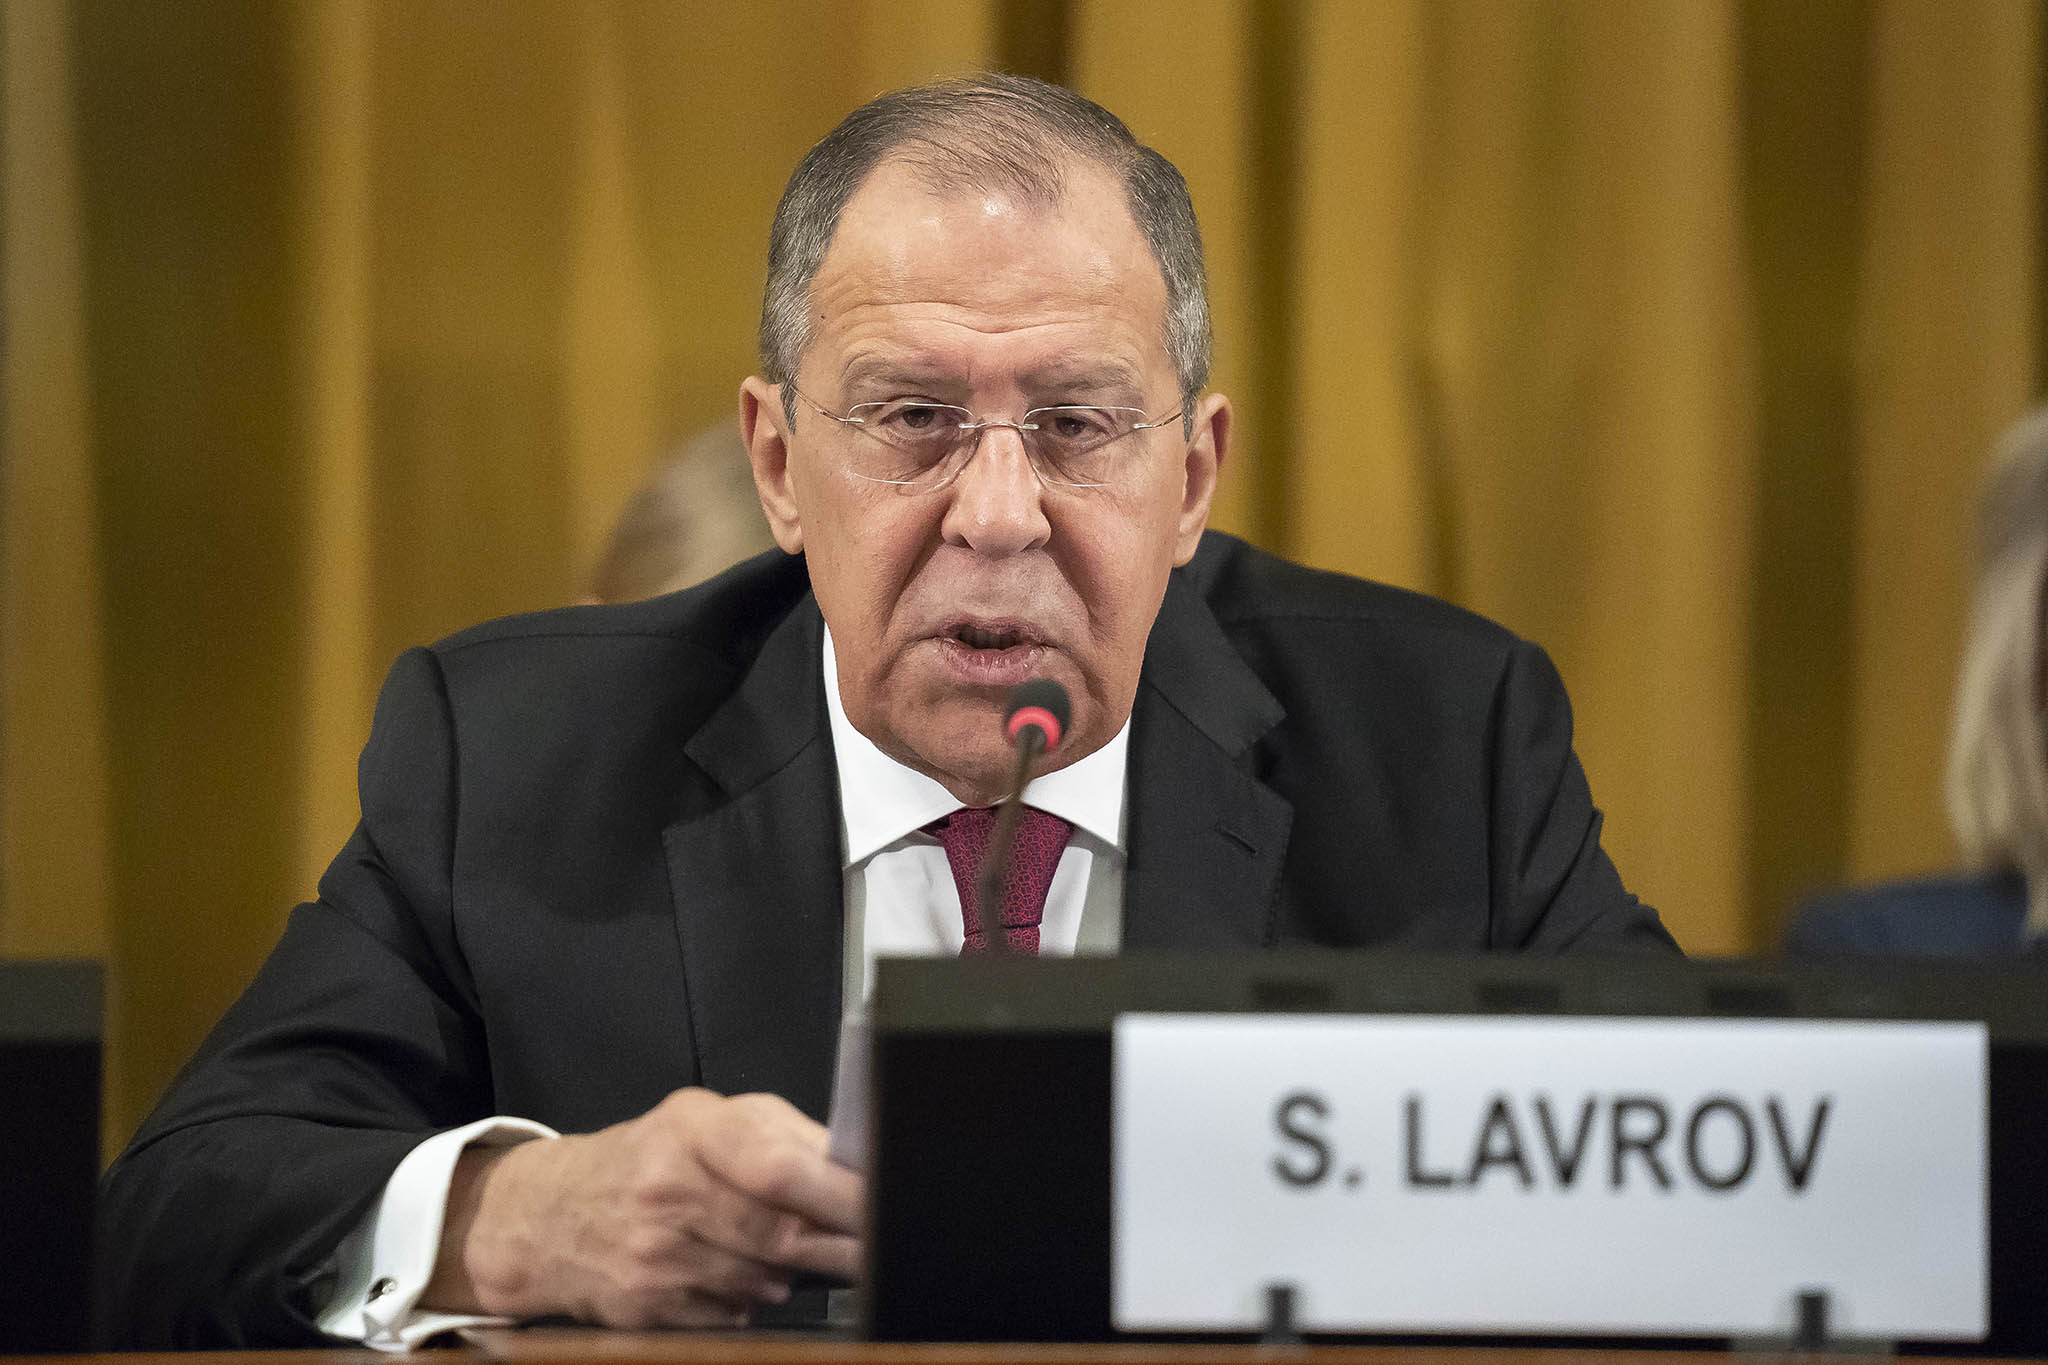 Russian Foreign Minister Sergey Lavrov at the U.N. Conference on Disarmament. March 20, 2019. (U.N. Geneva/Flickr)